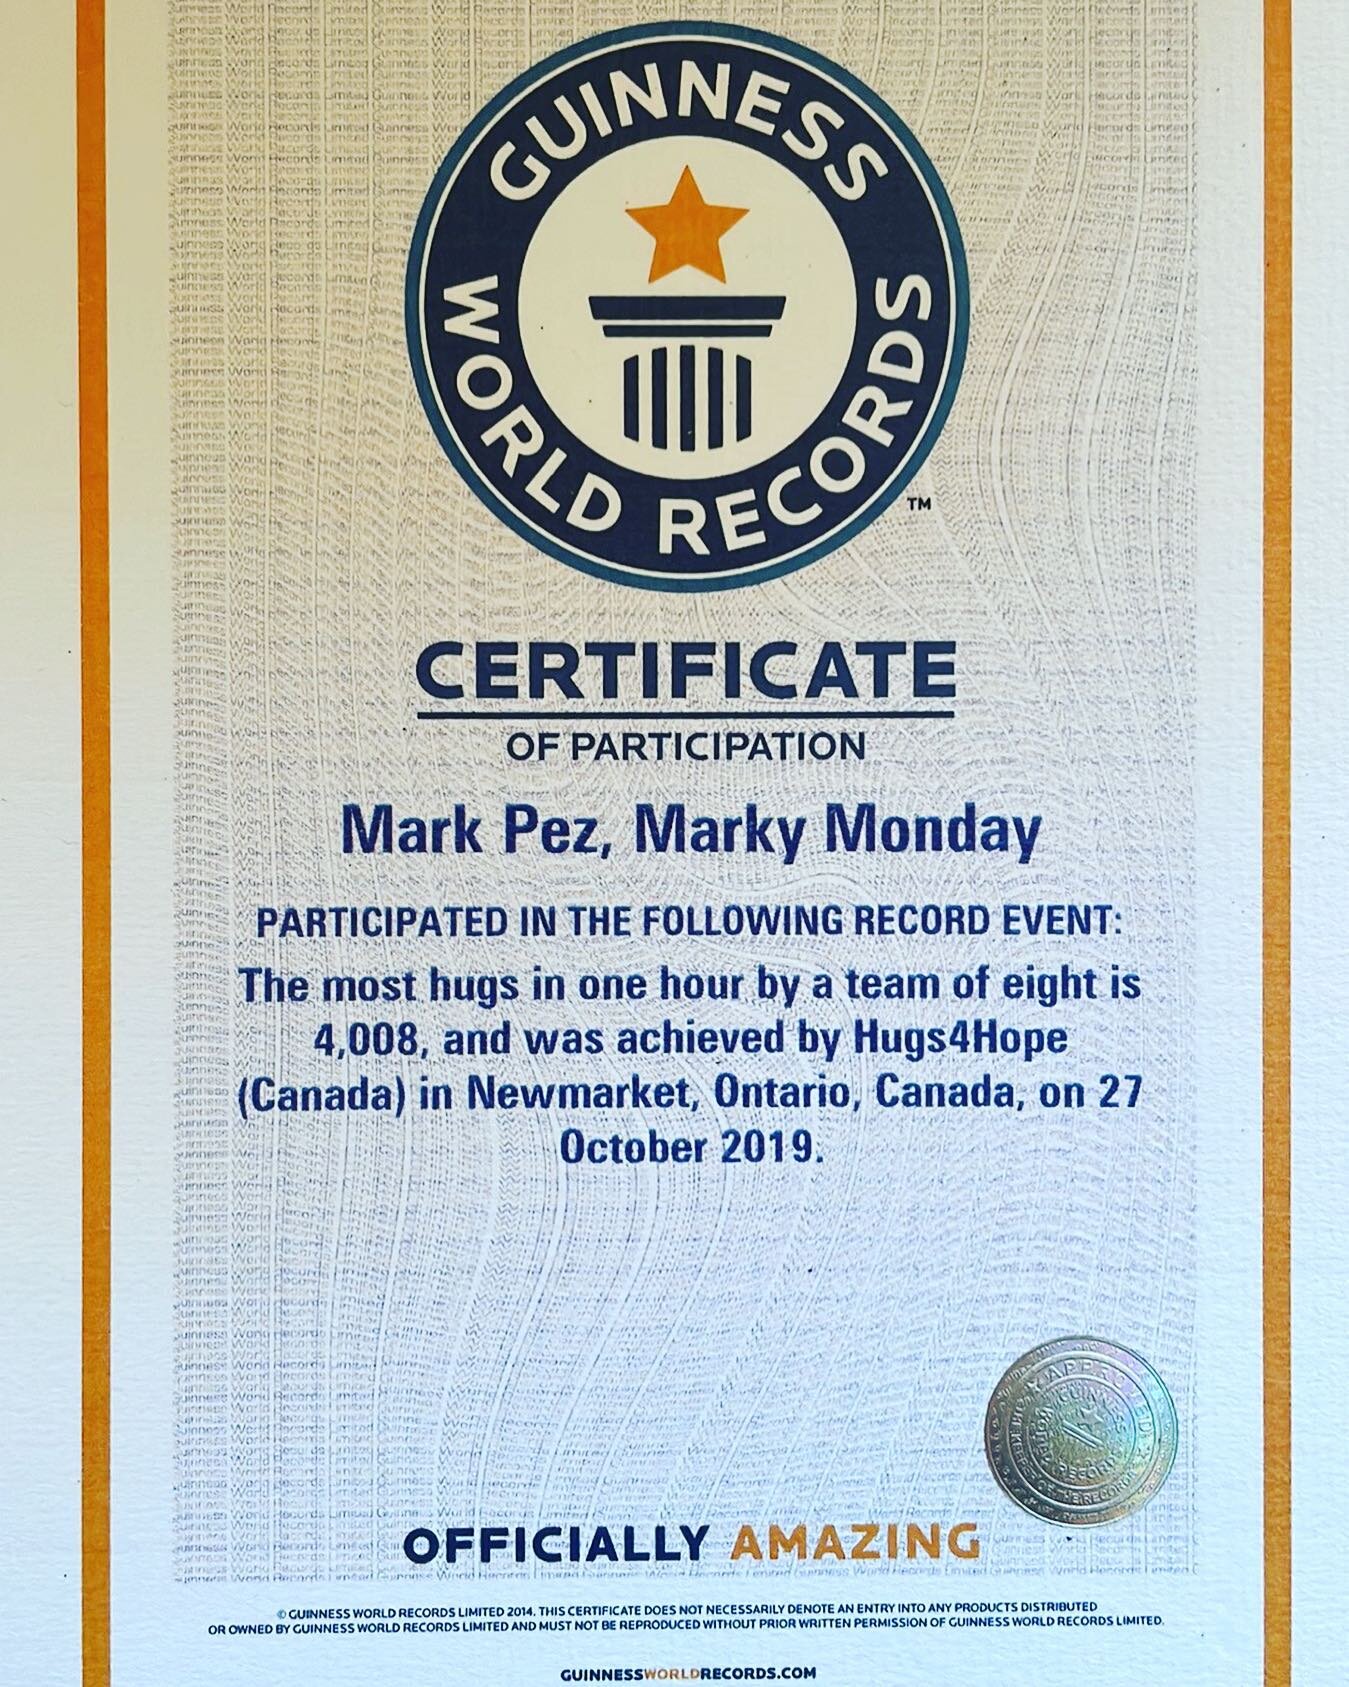 My Guinness World Record arrived in the mail today. I played the mandolin and sang &ldquo;Hug The Ones You Love&rdquo; while we broke the world record for most hugs in an hour. Thank you @nancybodi1 For mailing this to me. I feel so blessed! What a m